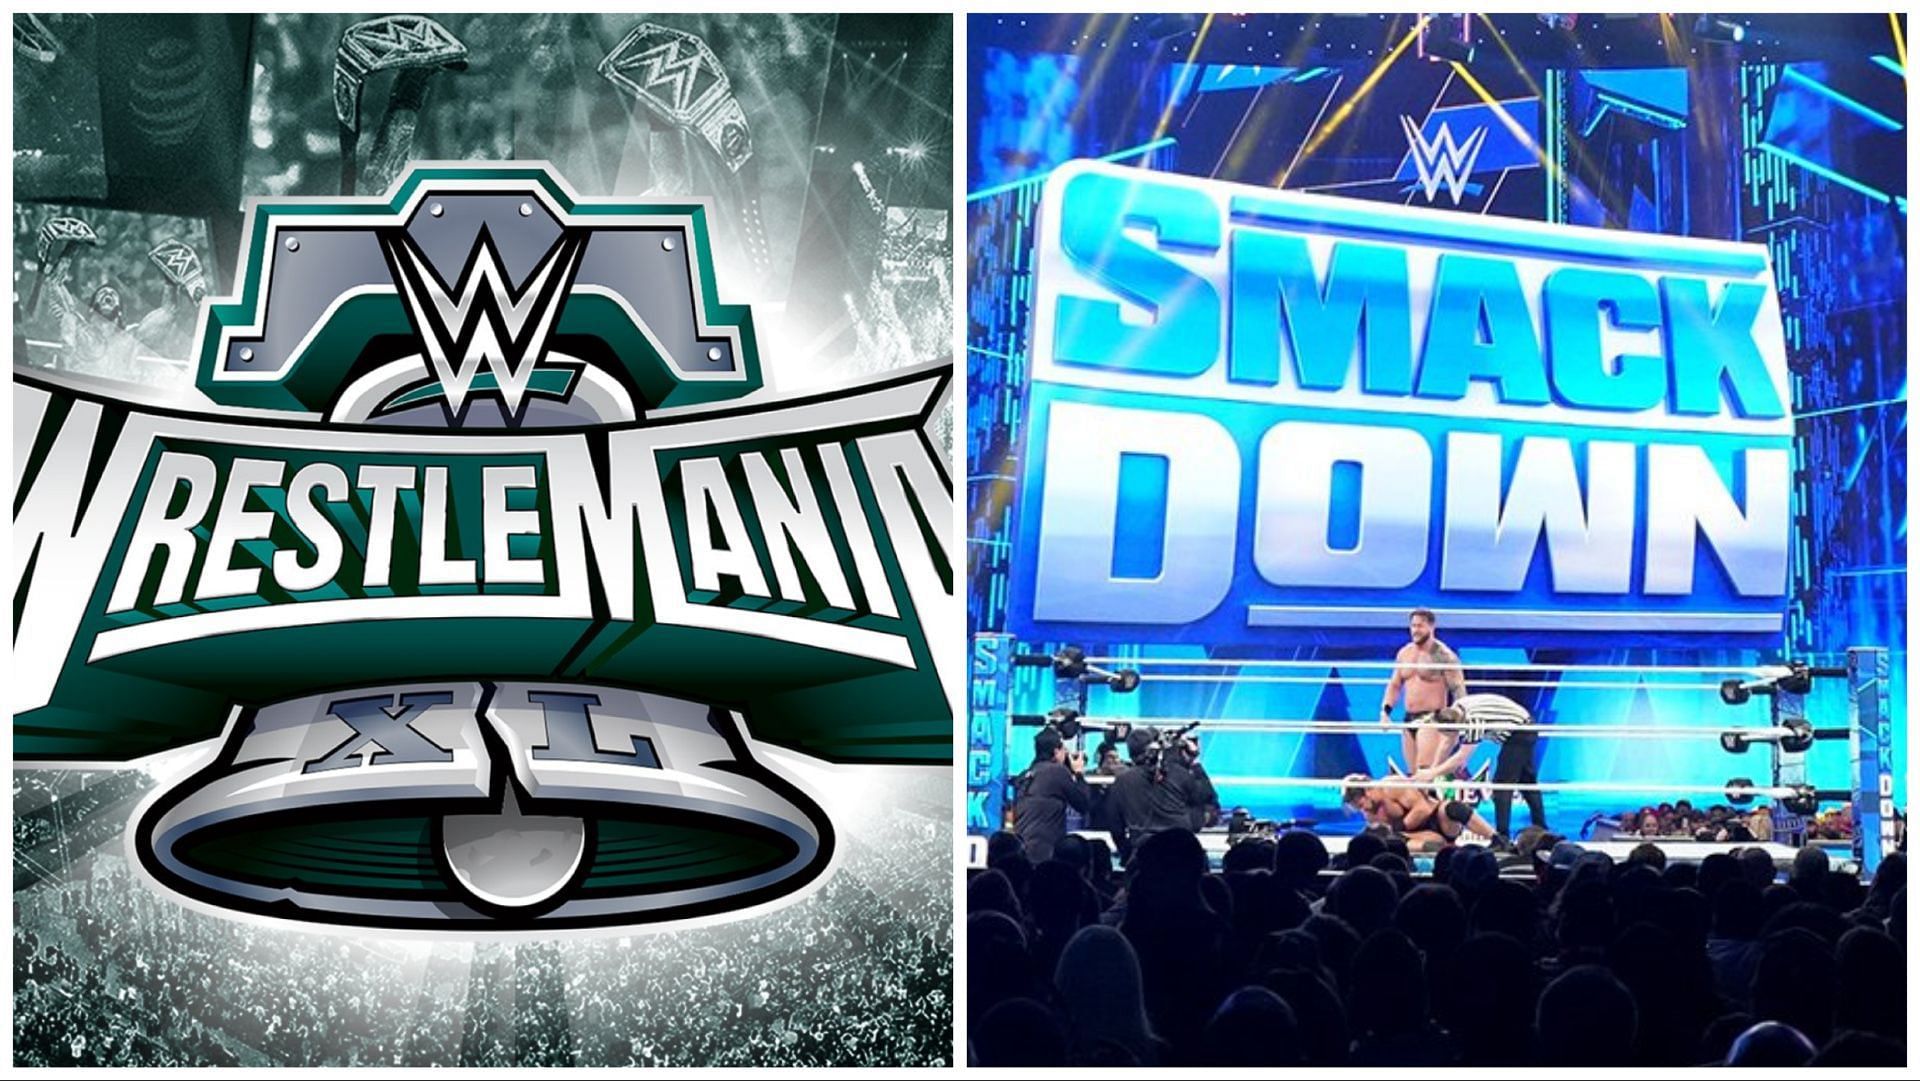 The official WWE WrestleMania XL logo, the WWE Universe packs arena for SmackDown